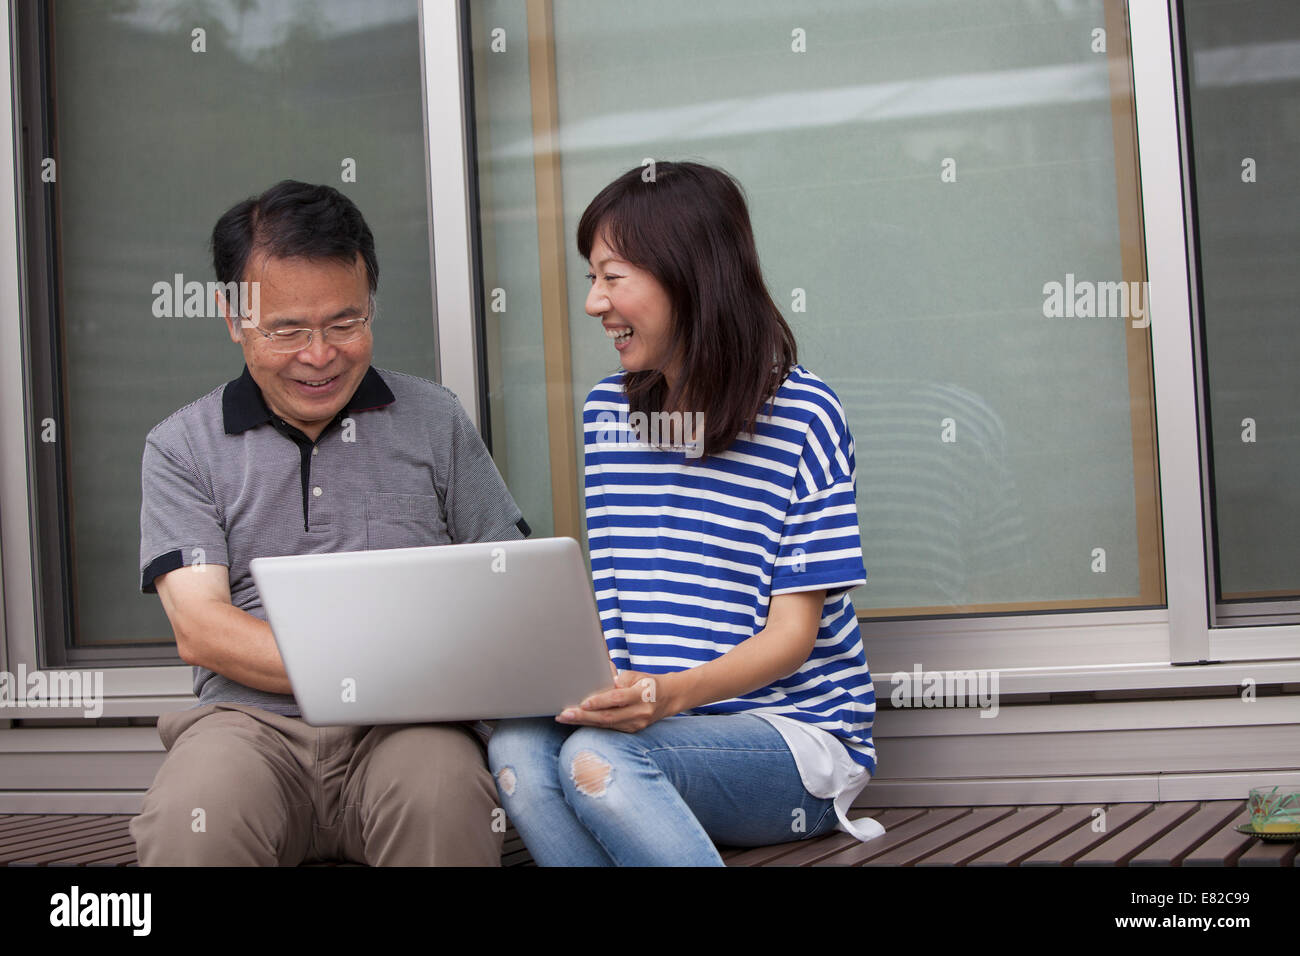 A man and a women sitting outside a house. Holding a laptop computer. Stock Photo